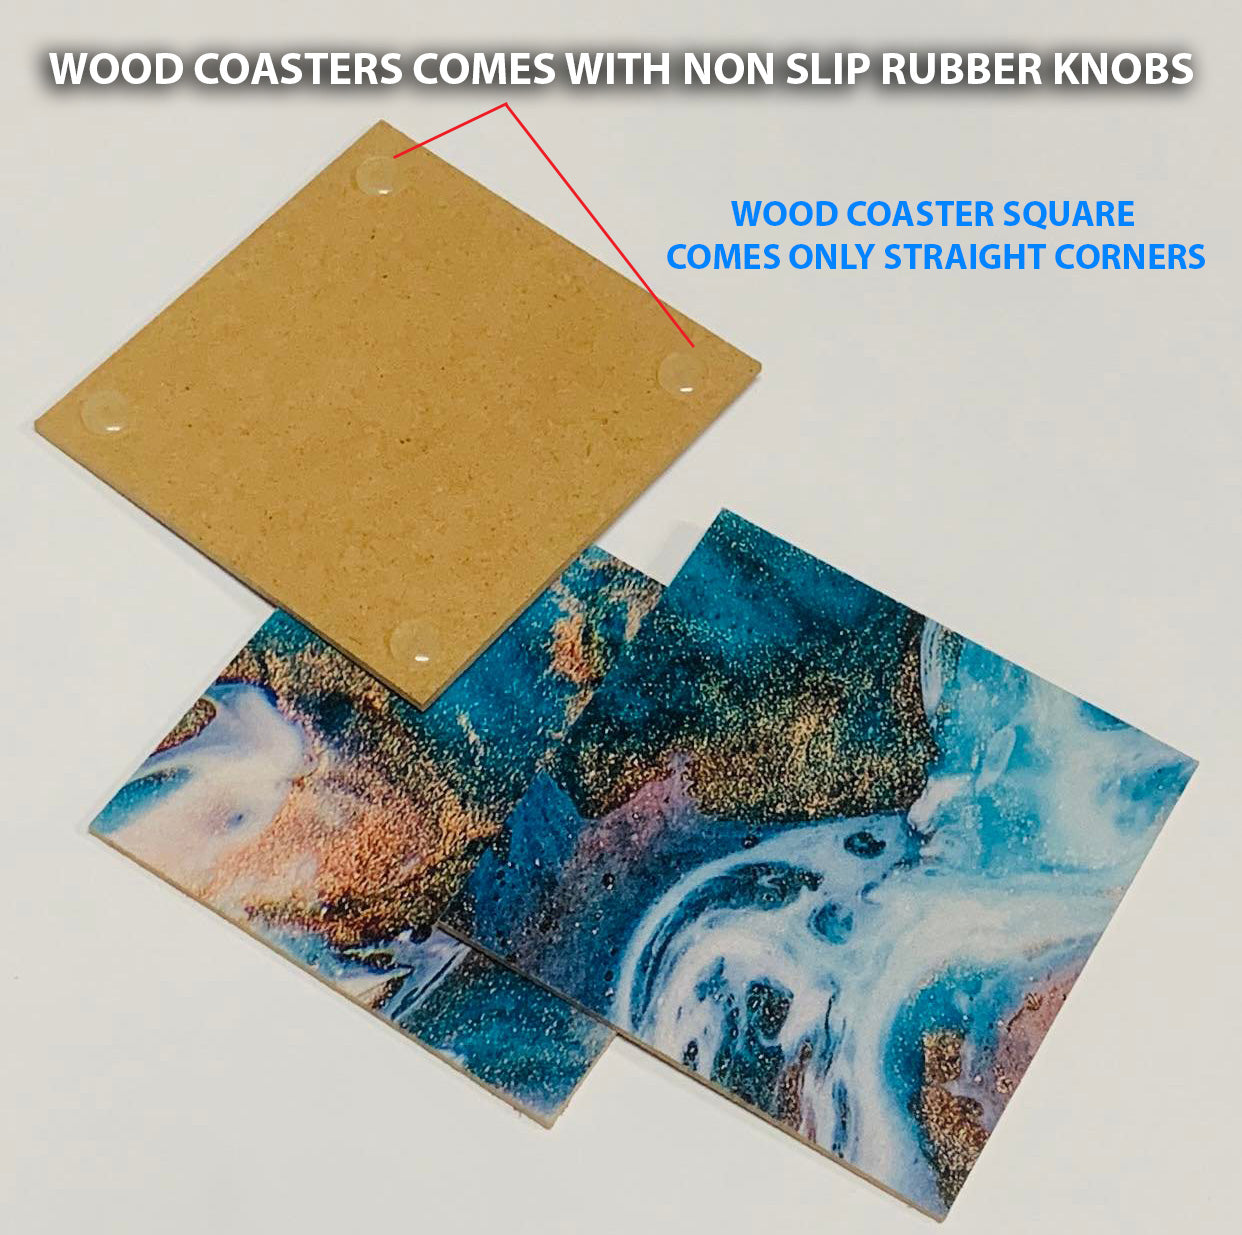 Silent Evening Night Under The Moon Coasters Wood & Rubber - Set of 6 Coasters